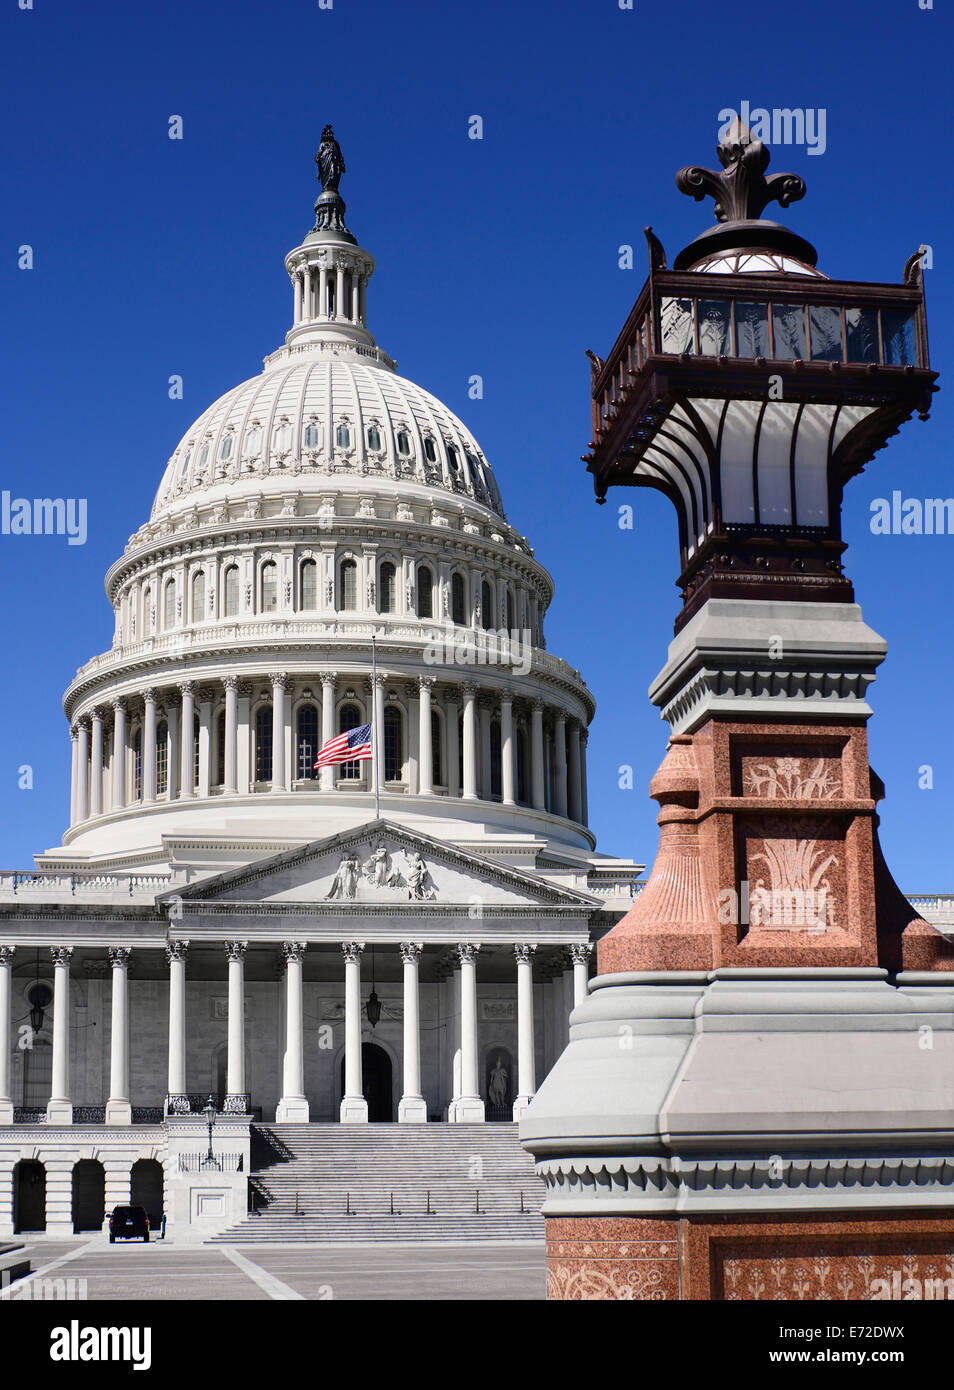 USA, Washington DC, Capitol Building  Head on view of the central section with its dome and lampstand in the foreground. Stock Photo